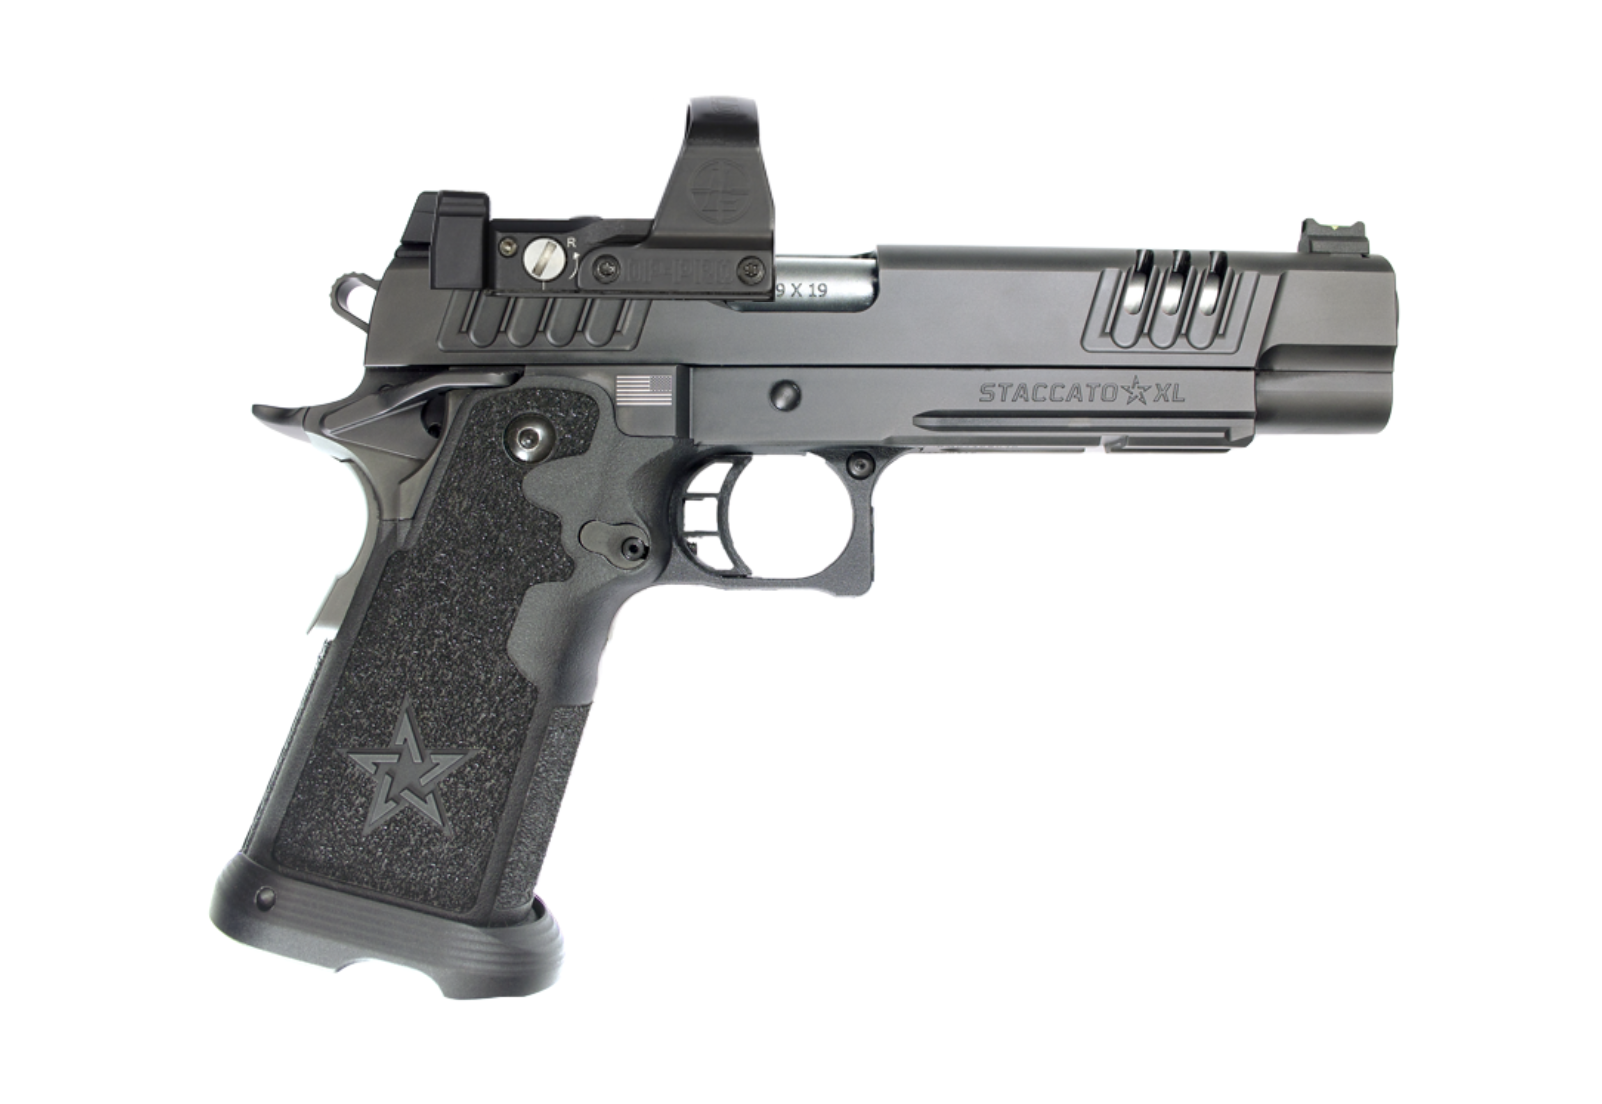 the staccato 2011 pistol with a slide mounted red dot for limited optics division